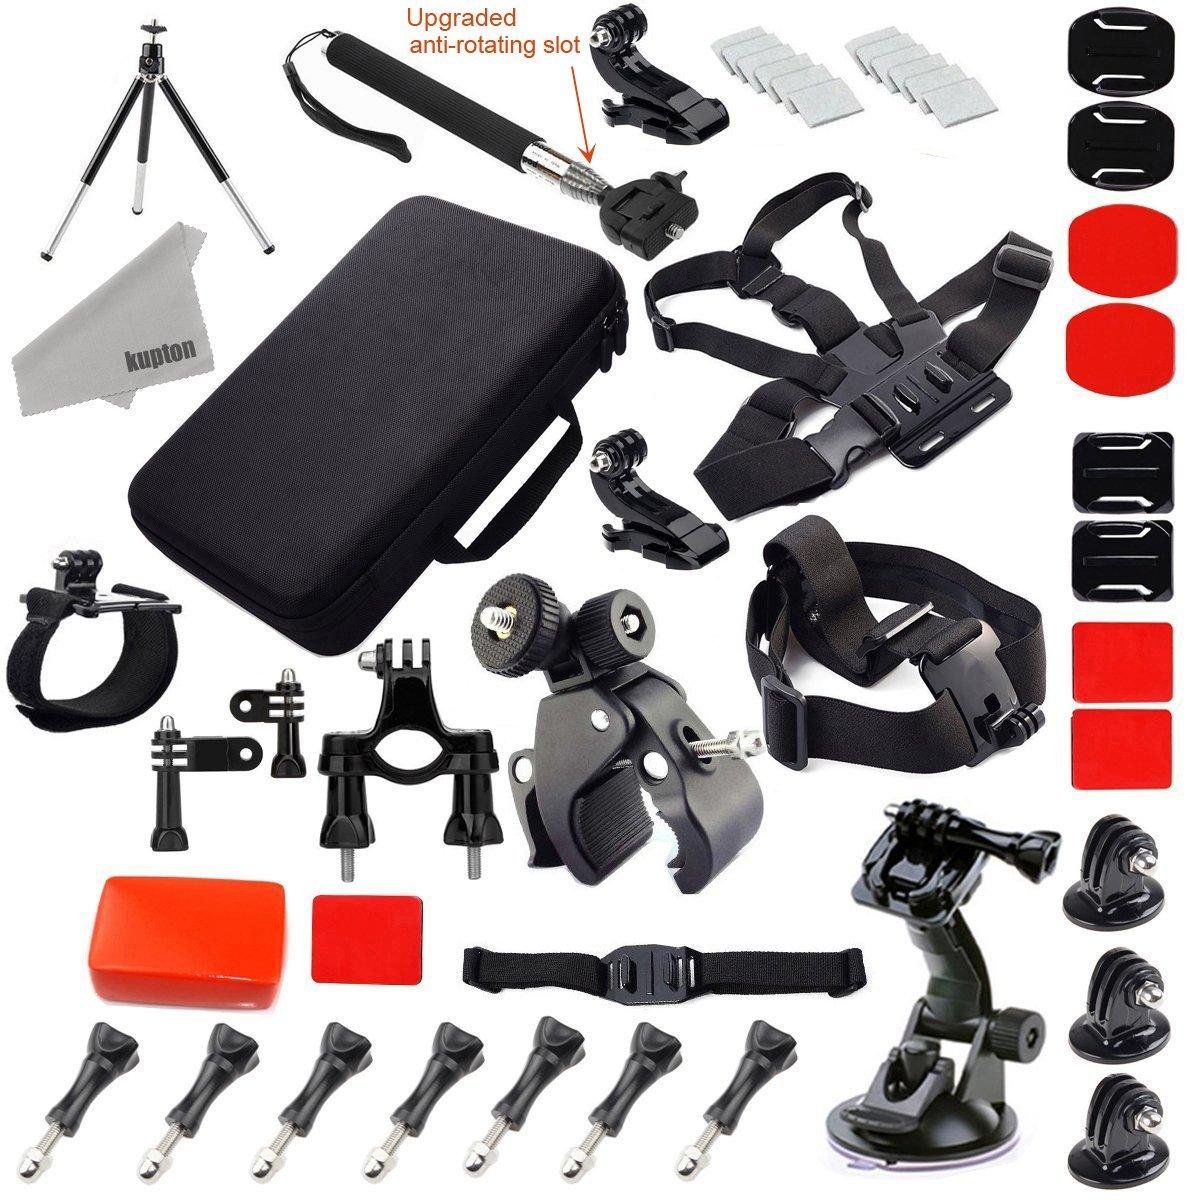 50 in 1 china gopro accessories set kit, for gopro 6/5/4 ,SJ4000,xiaoyi camera 5